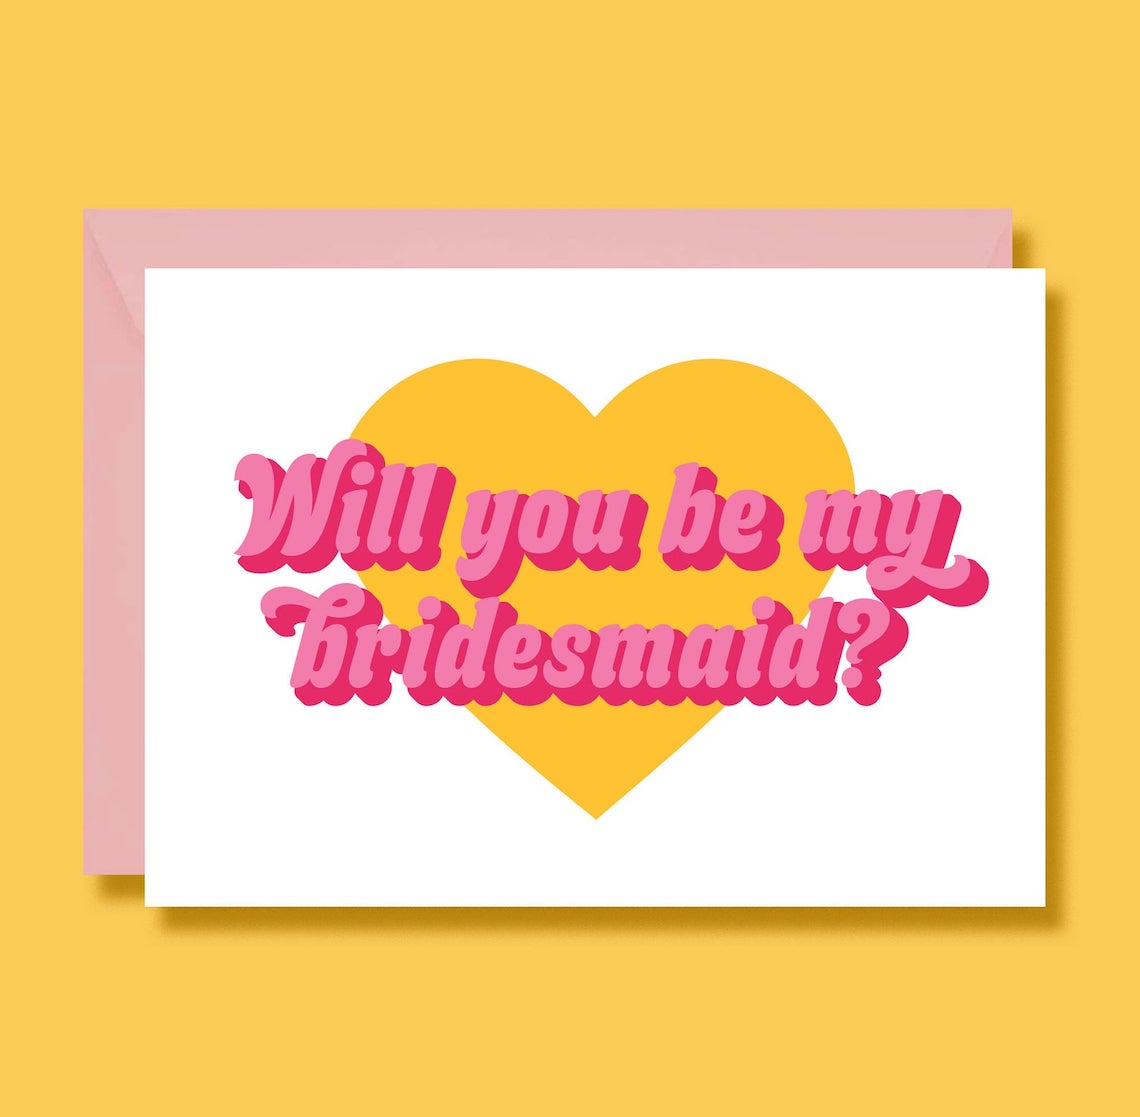 The Best Will You Be My Bridesmaid Cards Bridal Musings 14 - 20 tấm thiệp "Will You Be My Bridesmaid" hay nhất